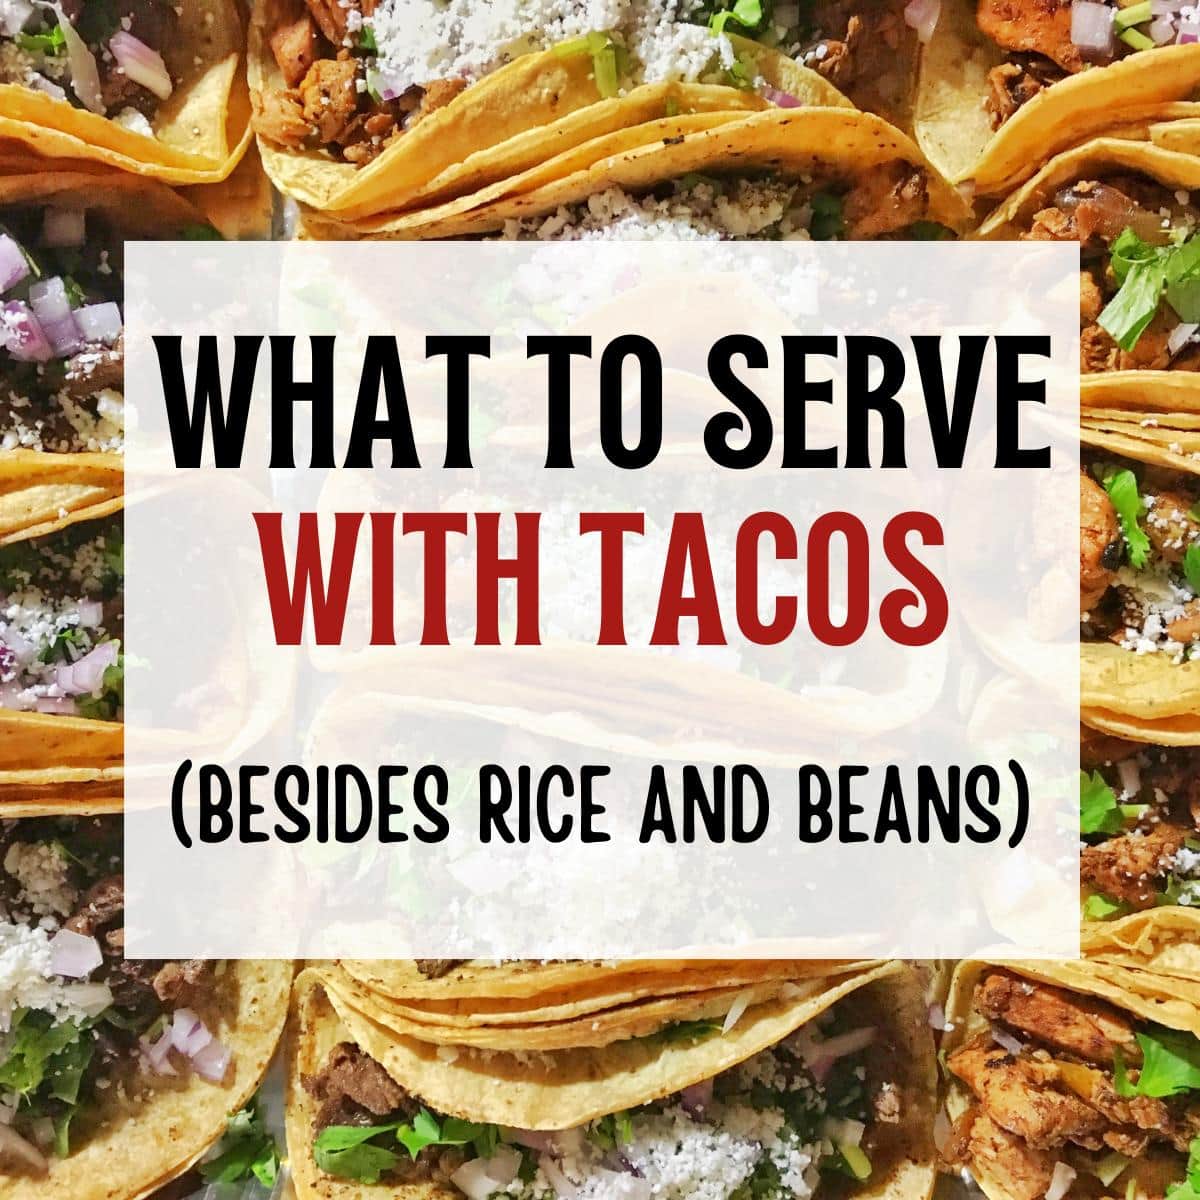 A full background of tacos with What to Serve with Tacos Besides Rice and Beans text overlay.